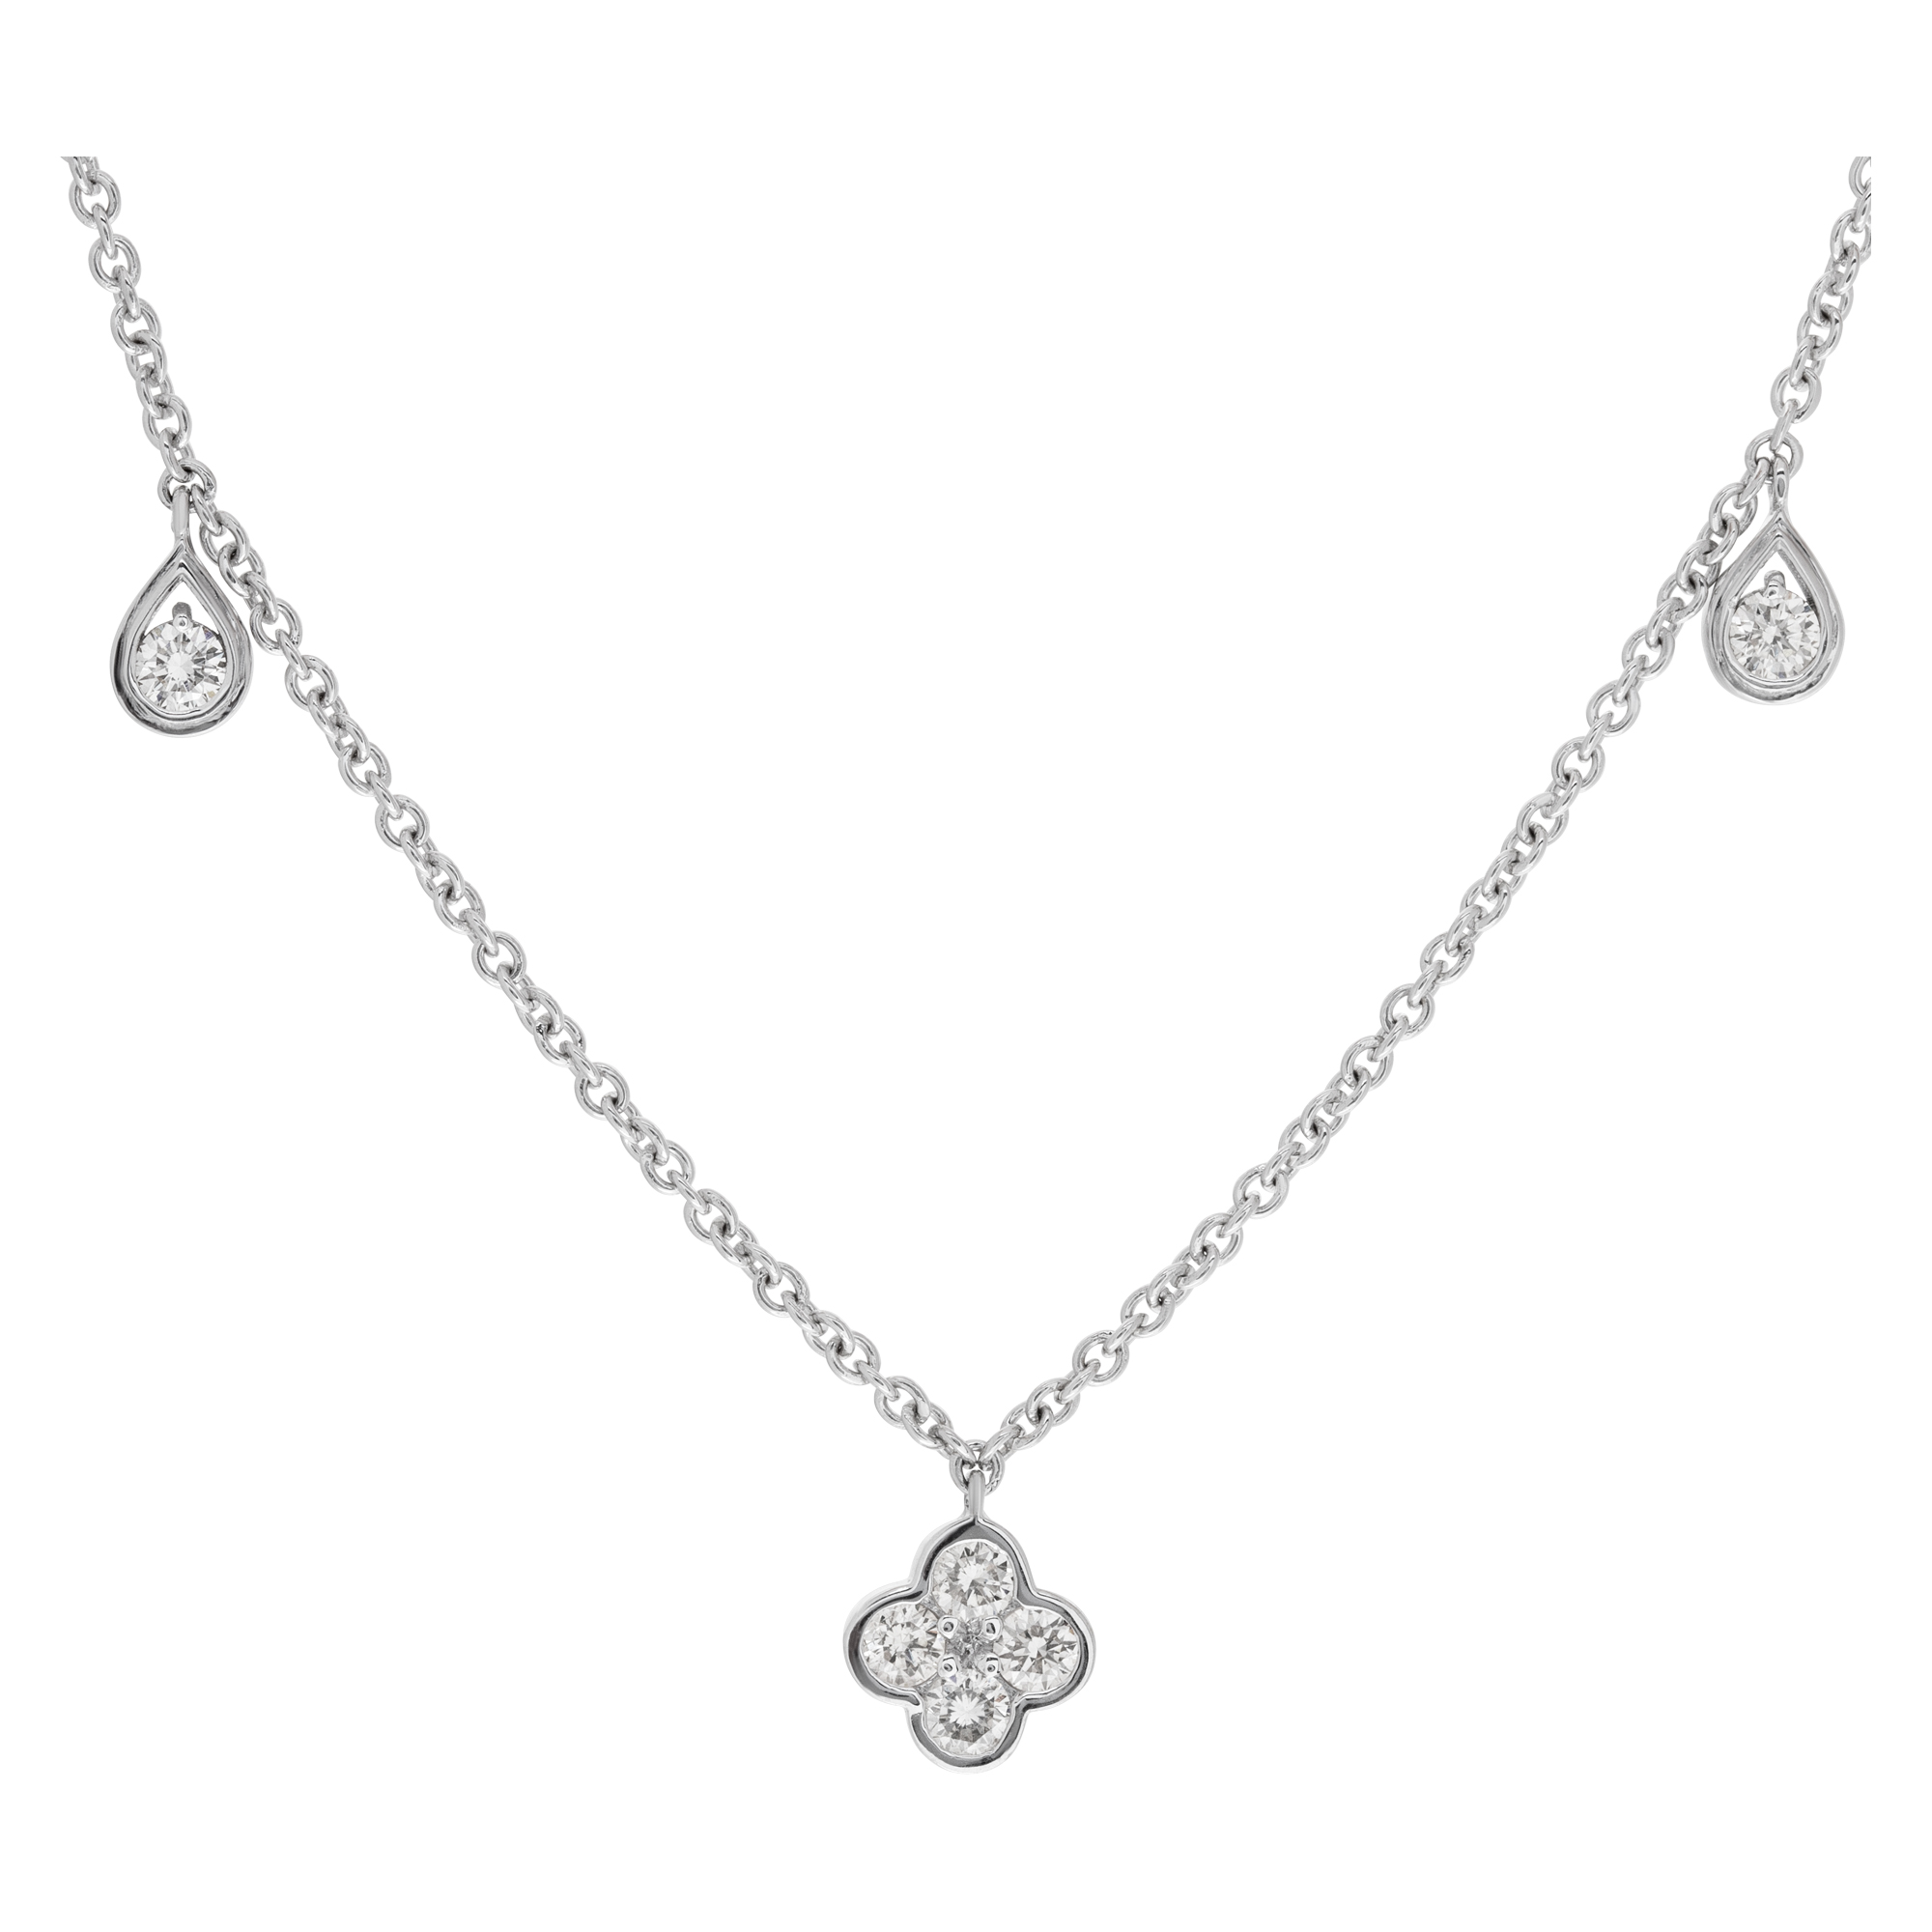 "Diamonds by the Yard" 18 inches chain with approx 1 carat total weight bezeled set, full cut round brilliant diamonds set in 18k white gold. Diamonds estimate: I/J color, SI clarity. Length 18 inches